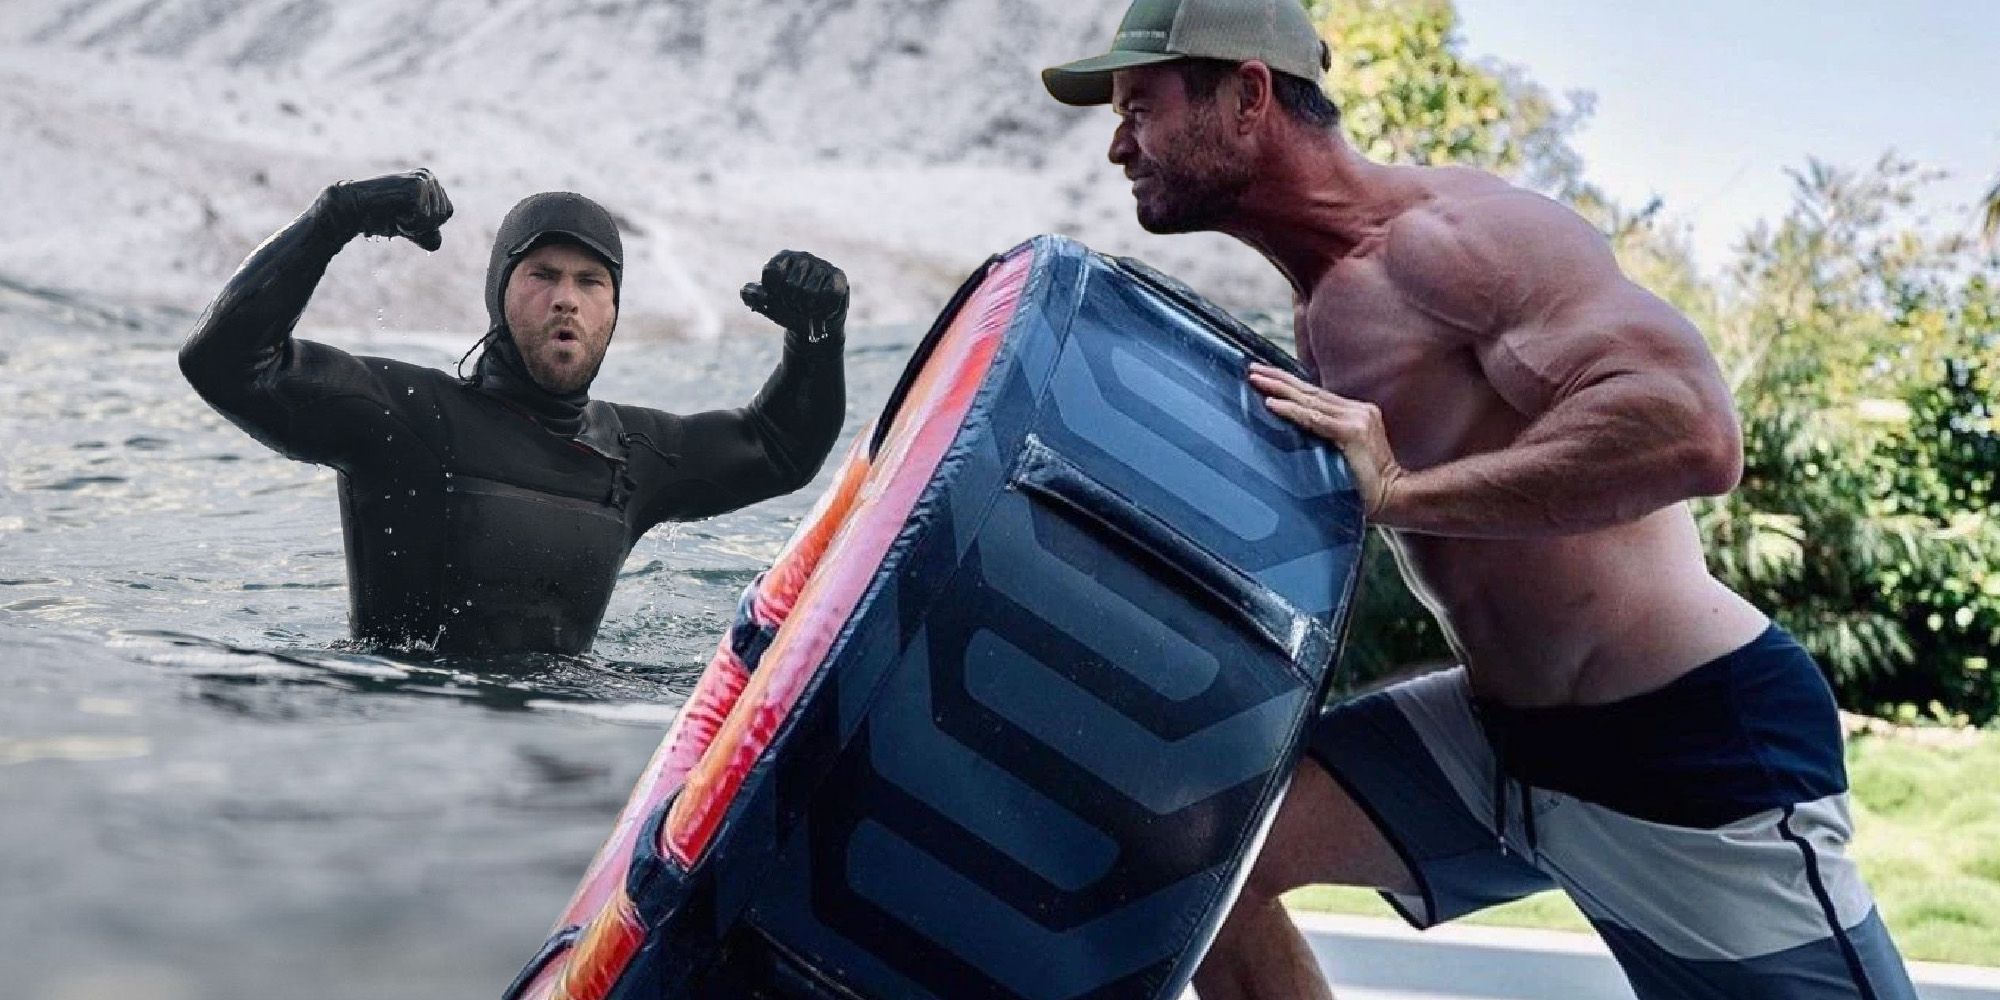 Chris Hemsworth Is The Most Swole He's Ever Been In Thor 4 Says Body Double